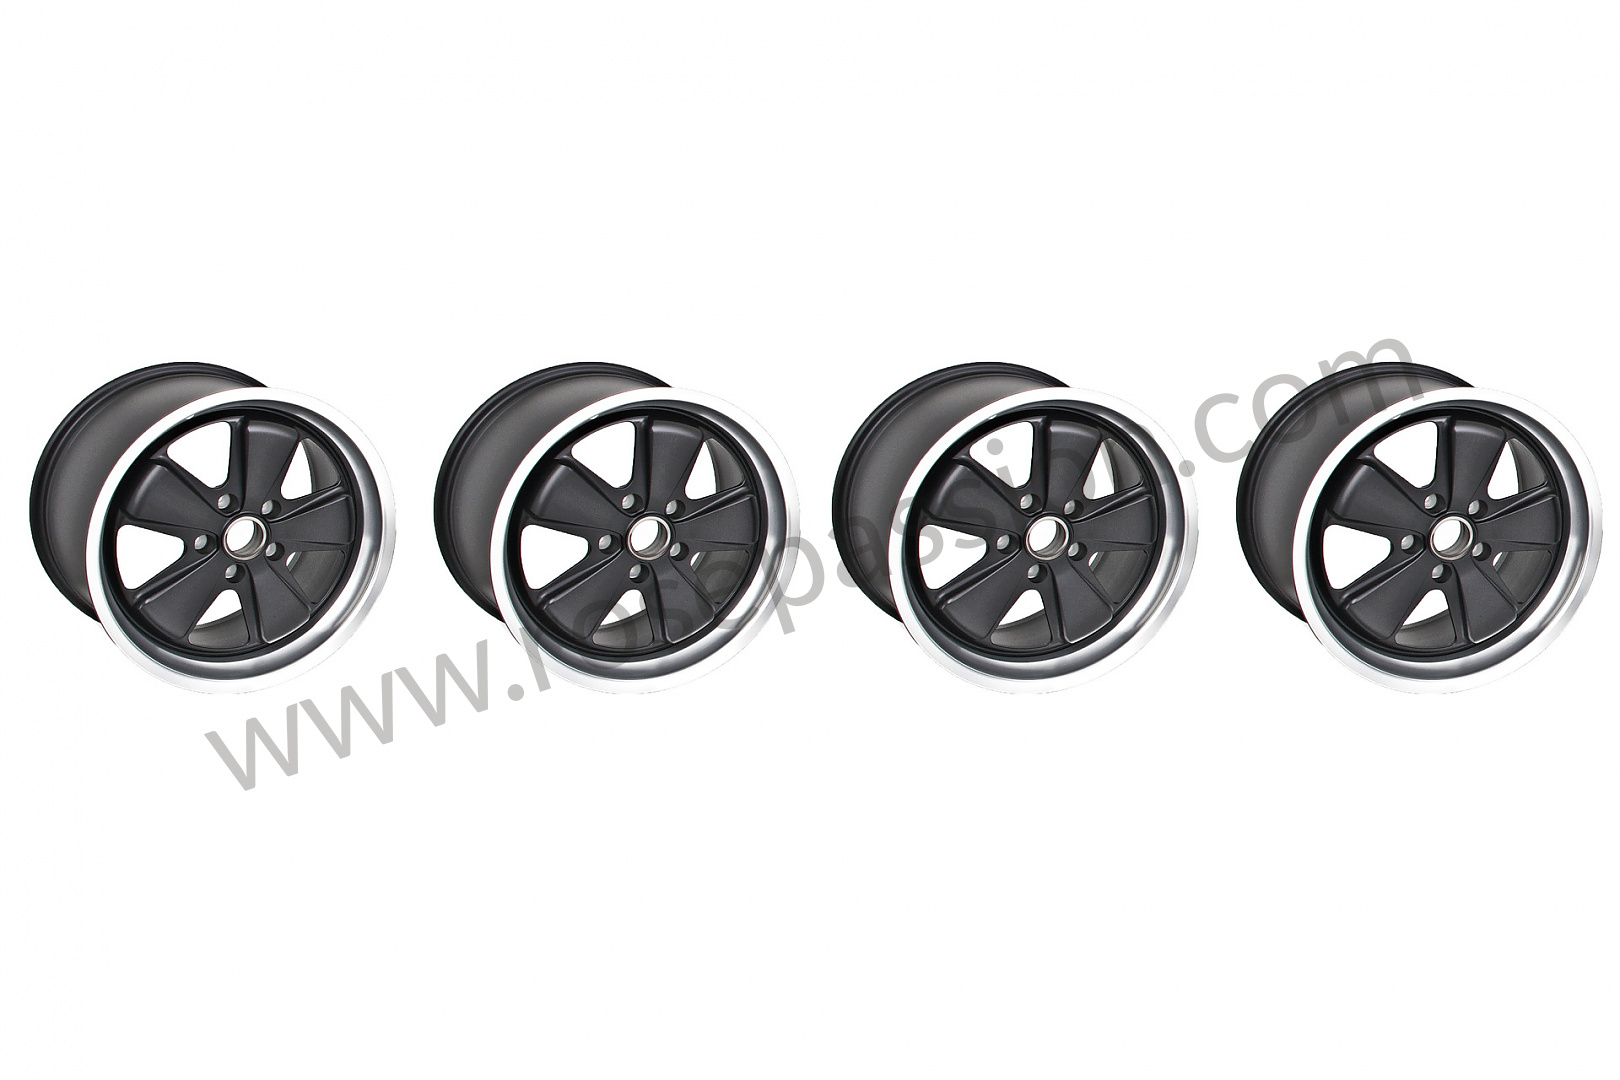 P198444 - Fuchs wheels, 18 inch, set of 4 wheels (black finish) 8 and 10 -  ET52 FRONT + ET65 REAR INCHES for Porsche 993 / 911 Carrera / 1996 / 993  carrera 2 / Targa / Manual gearbox, 6 speed